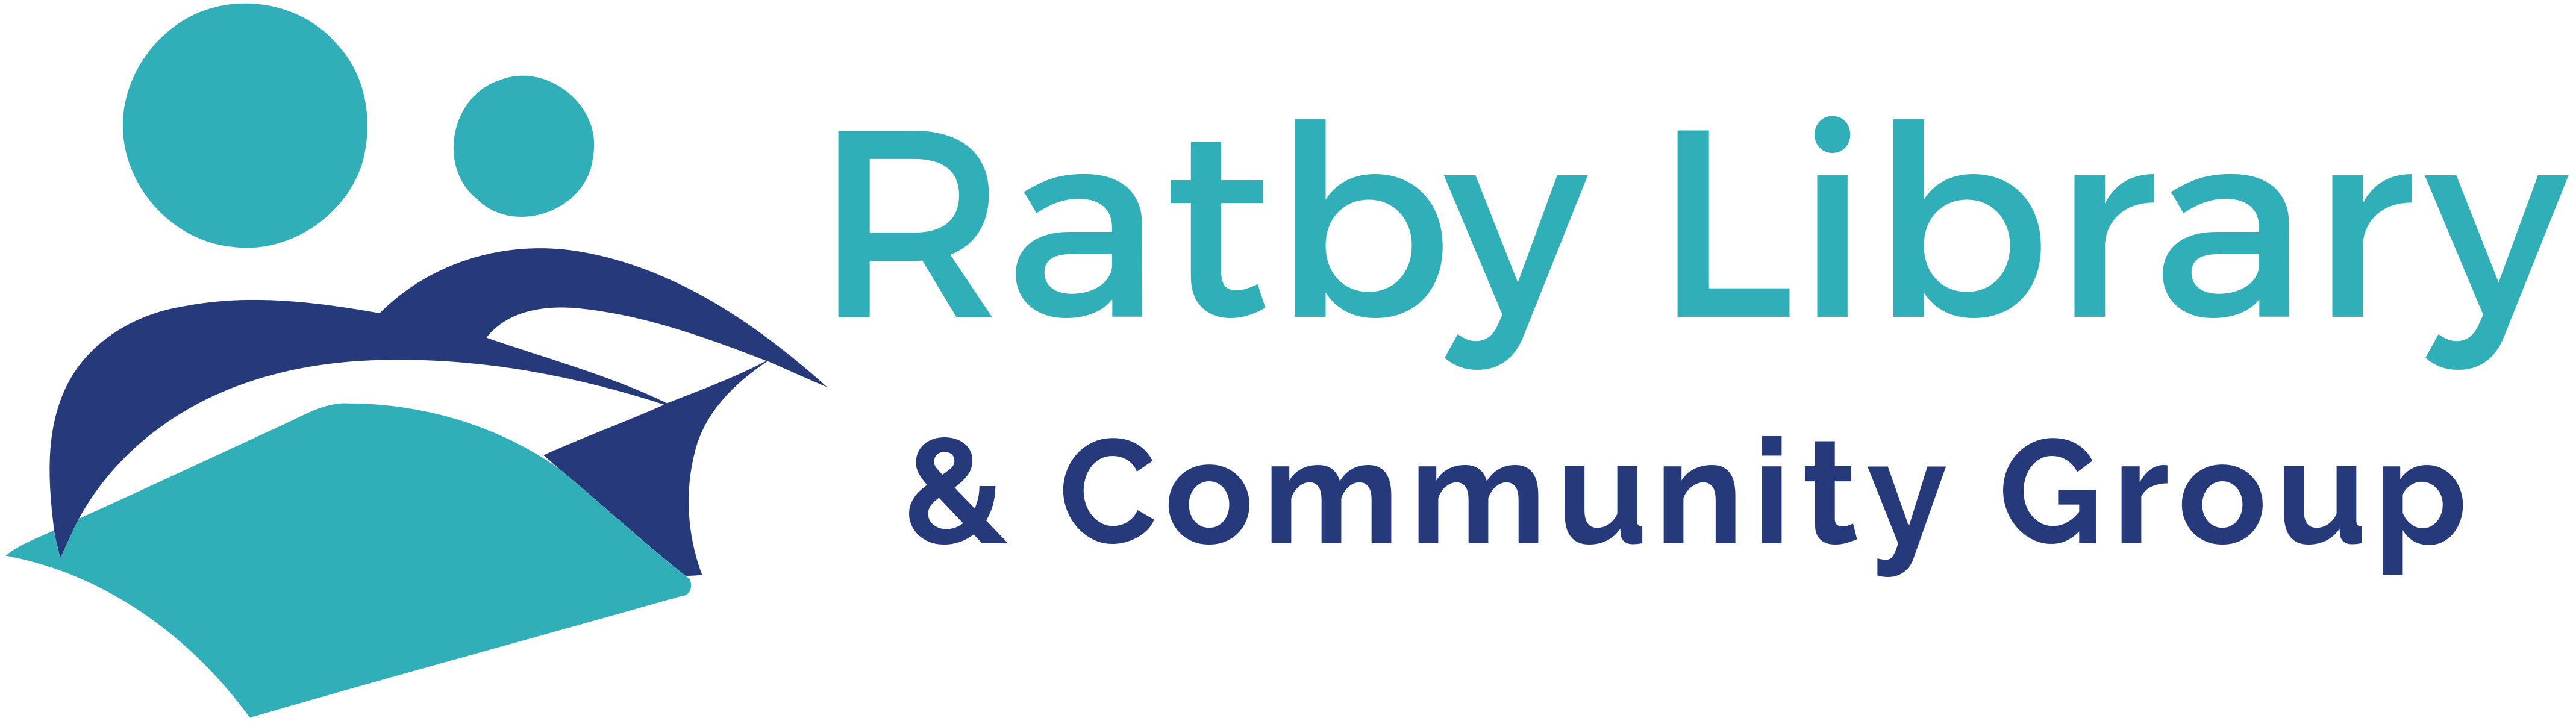 Ratby Library & Community Group